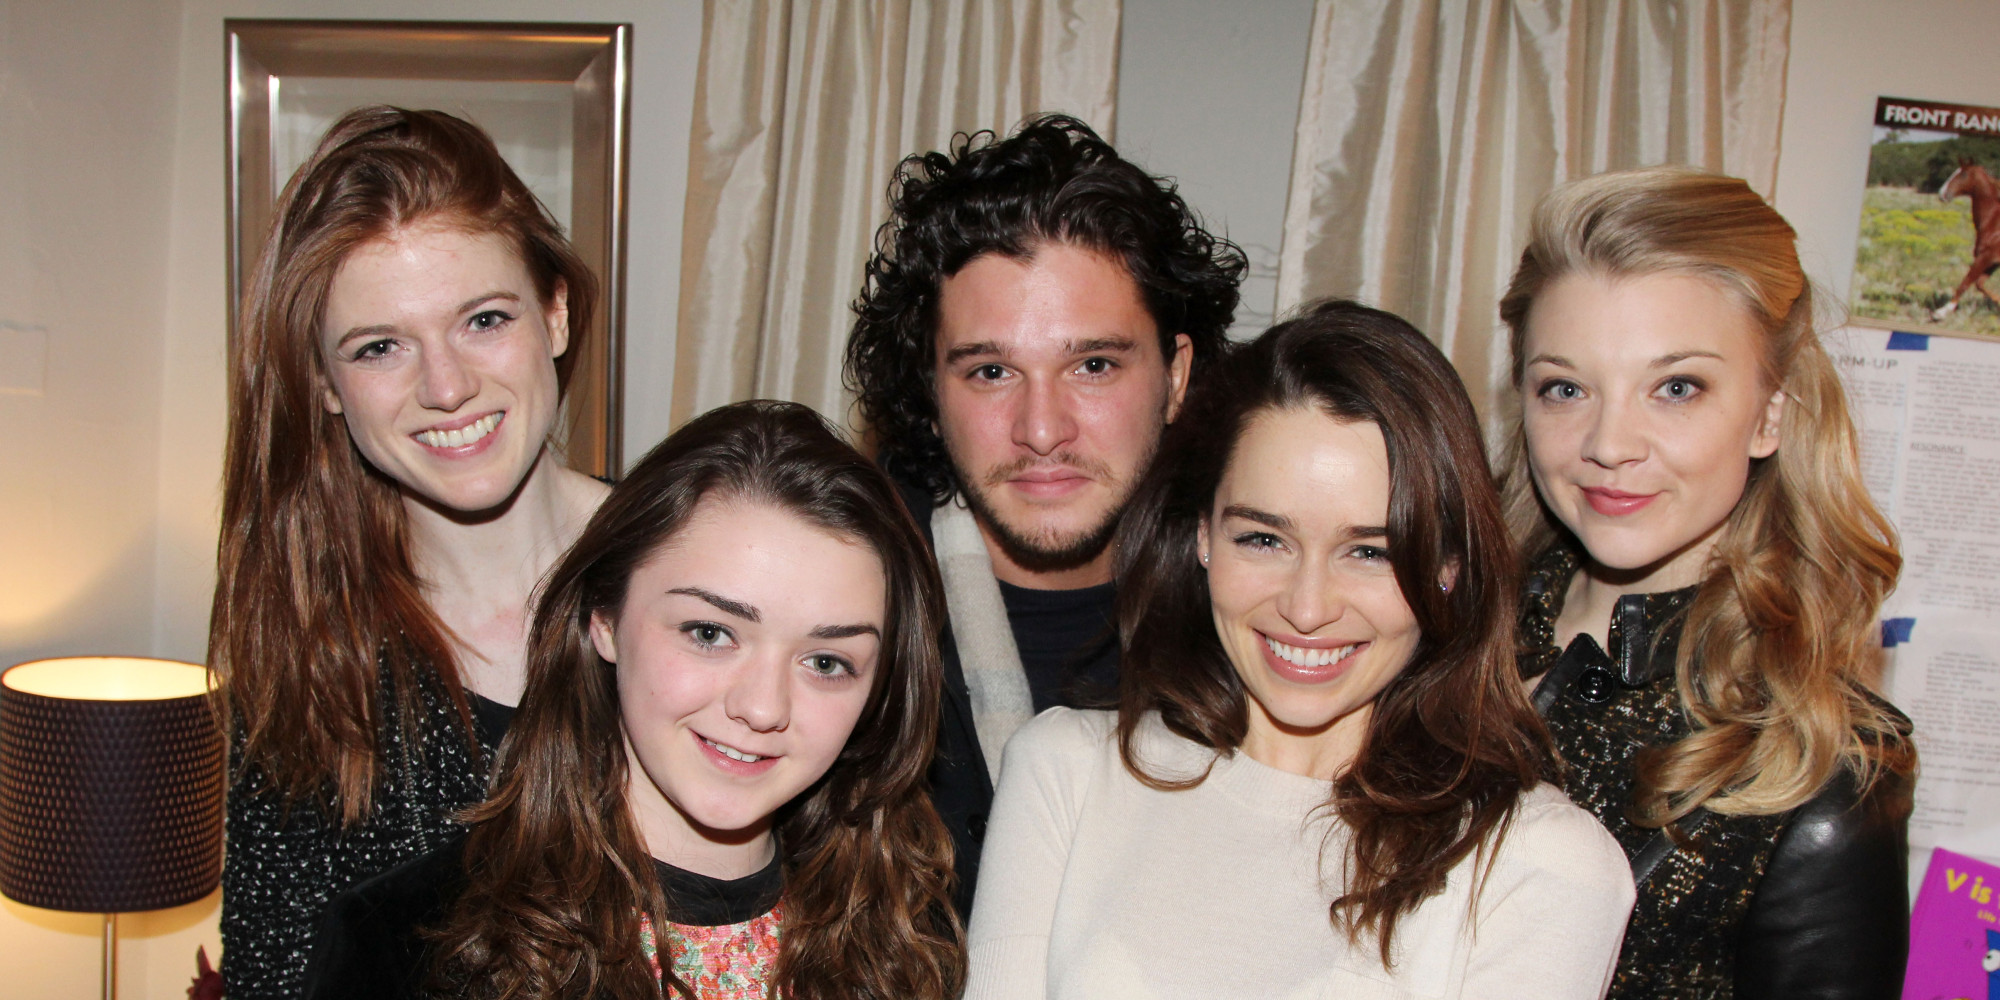 \u002639;Game Of Thrones\u002639; Cast Does The Ice Bucket Challenge Because Winter Is Coming  HuffPost